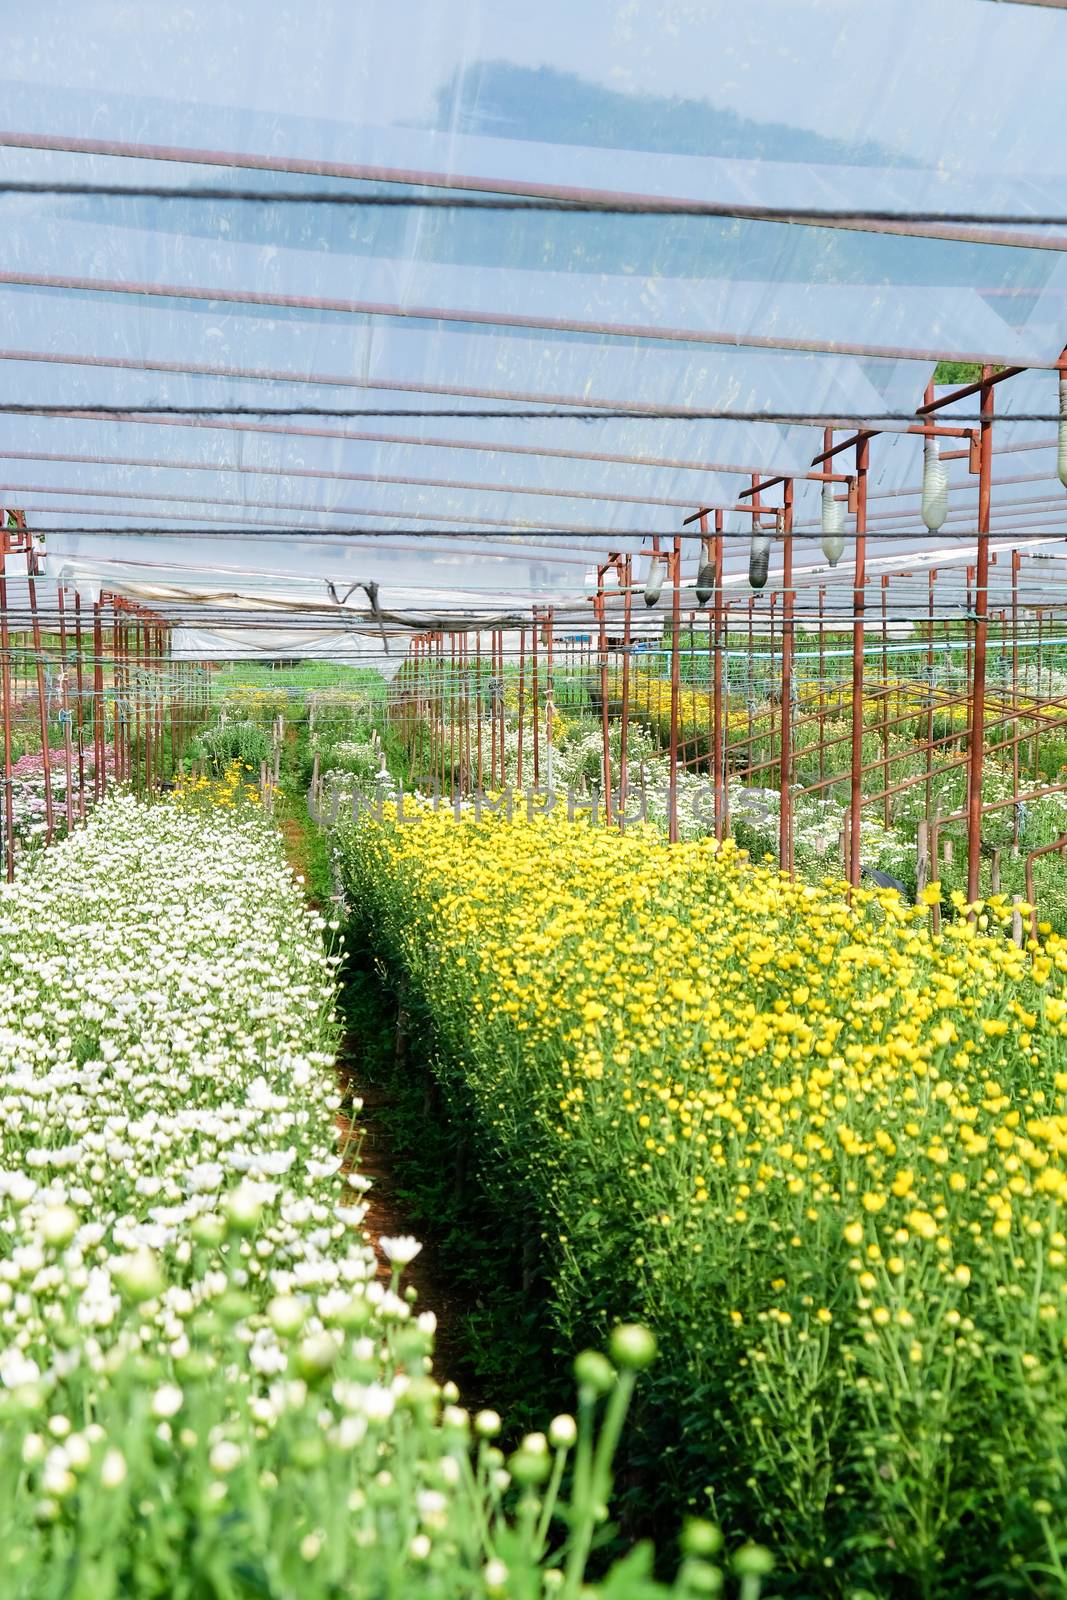 View of Gerbera cultivated flower beds and chrysanthemum flowers are being cultivated on a farm in Saraburi, Thailand